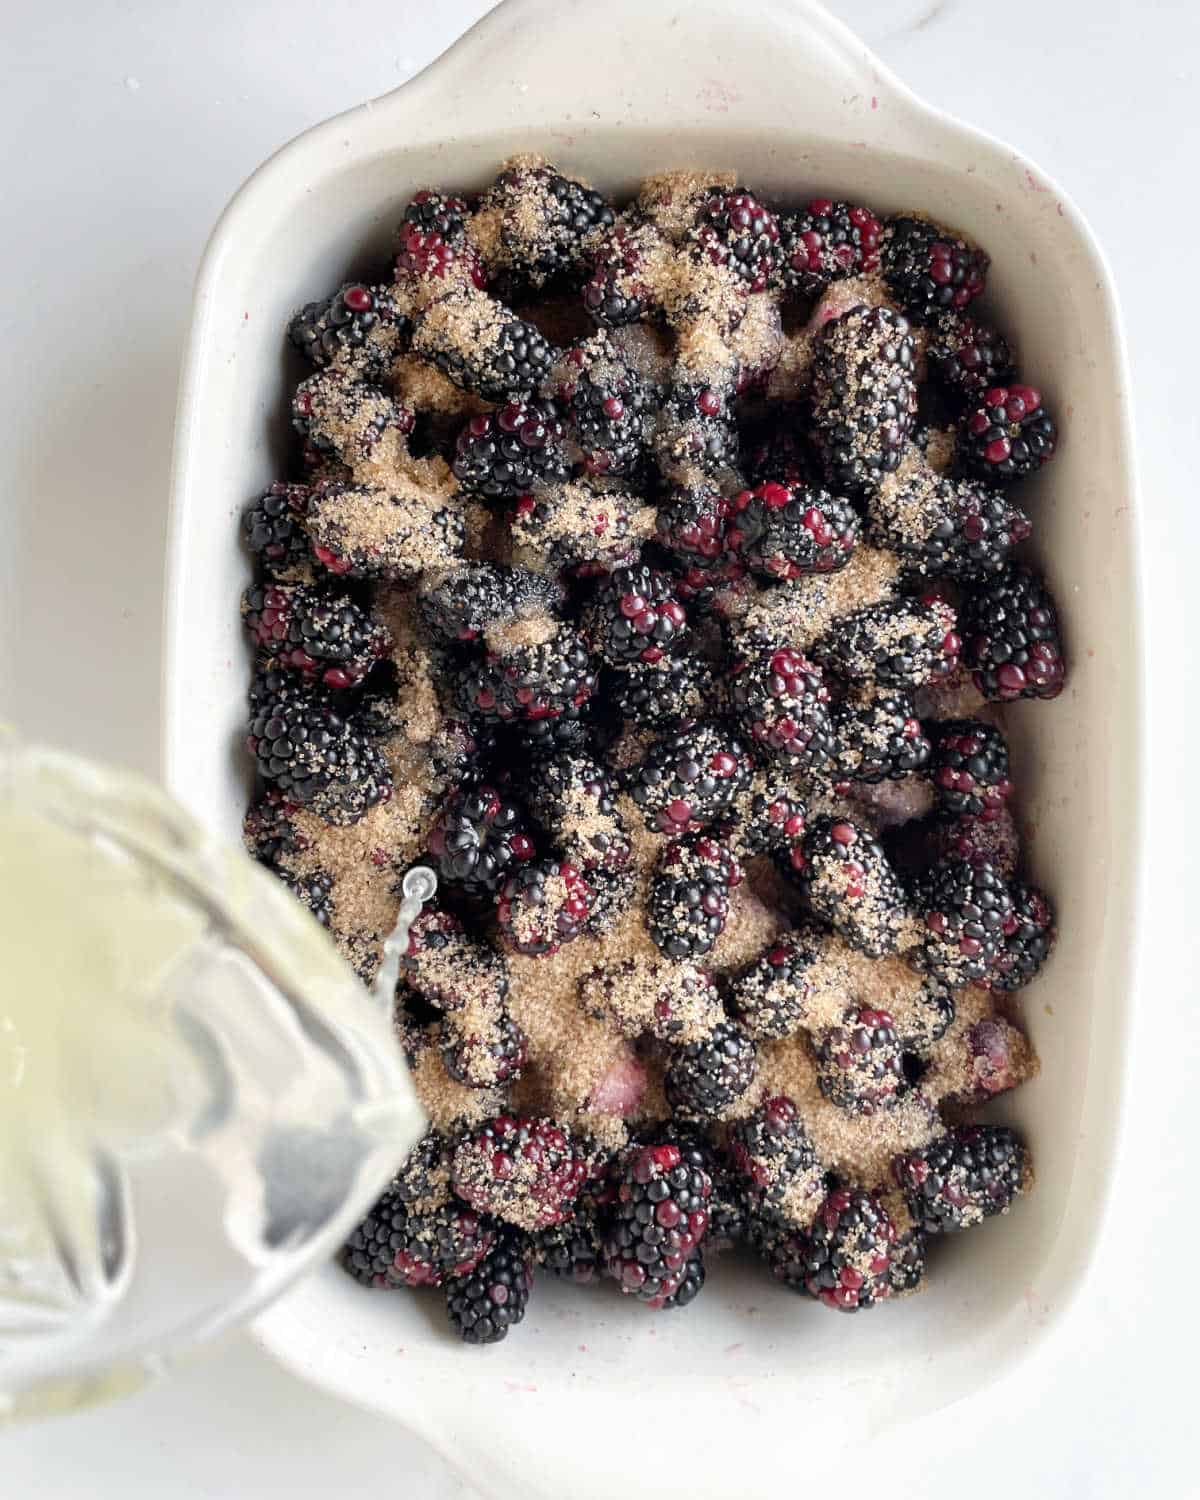 Adding lemon juice to blackberries and brown sugar in a cream colored dish on a white surface.